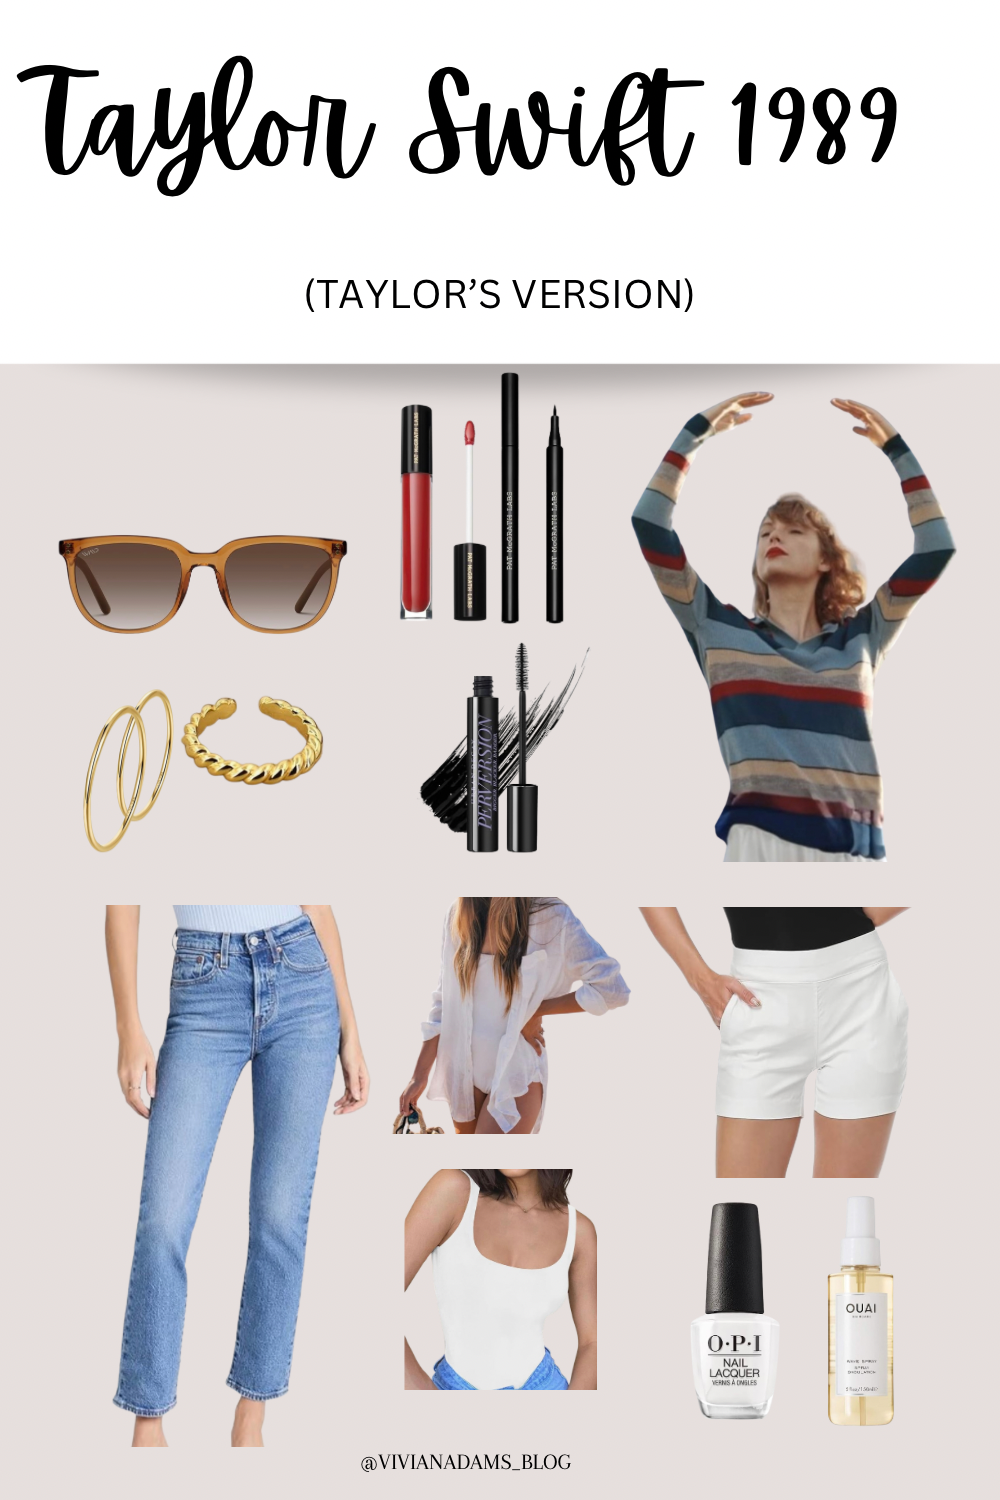 Taylor Swift 1989 Outfit (Taylor’s Version)